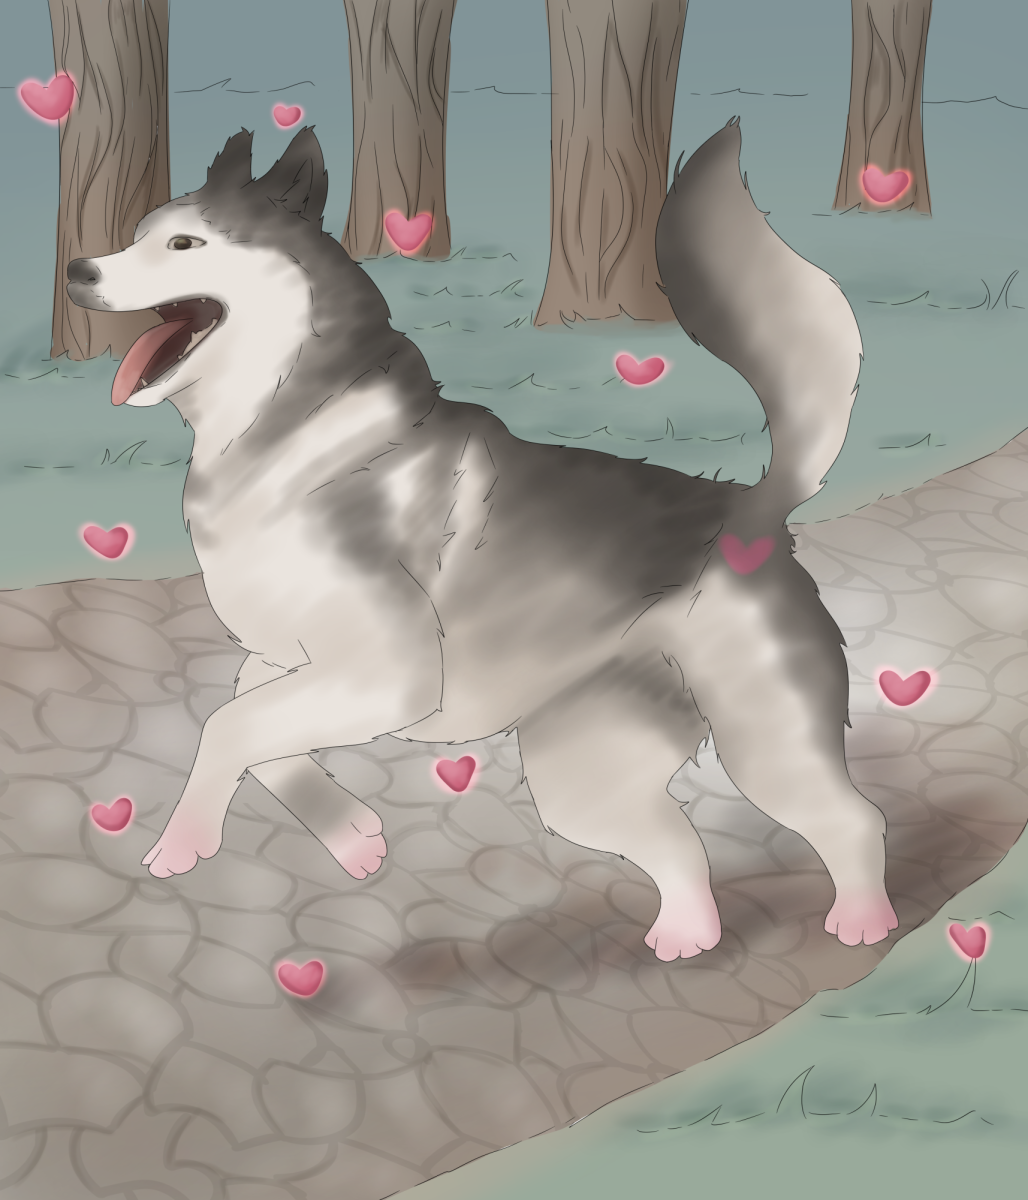 A huskie prances down a wooded, cobble-stone path surrounded by floating hearts. Valentines Day is just around the corner, NIU; its time to spread the Huskie love! (Robin Gamboa | Northern Star)